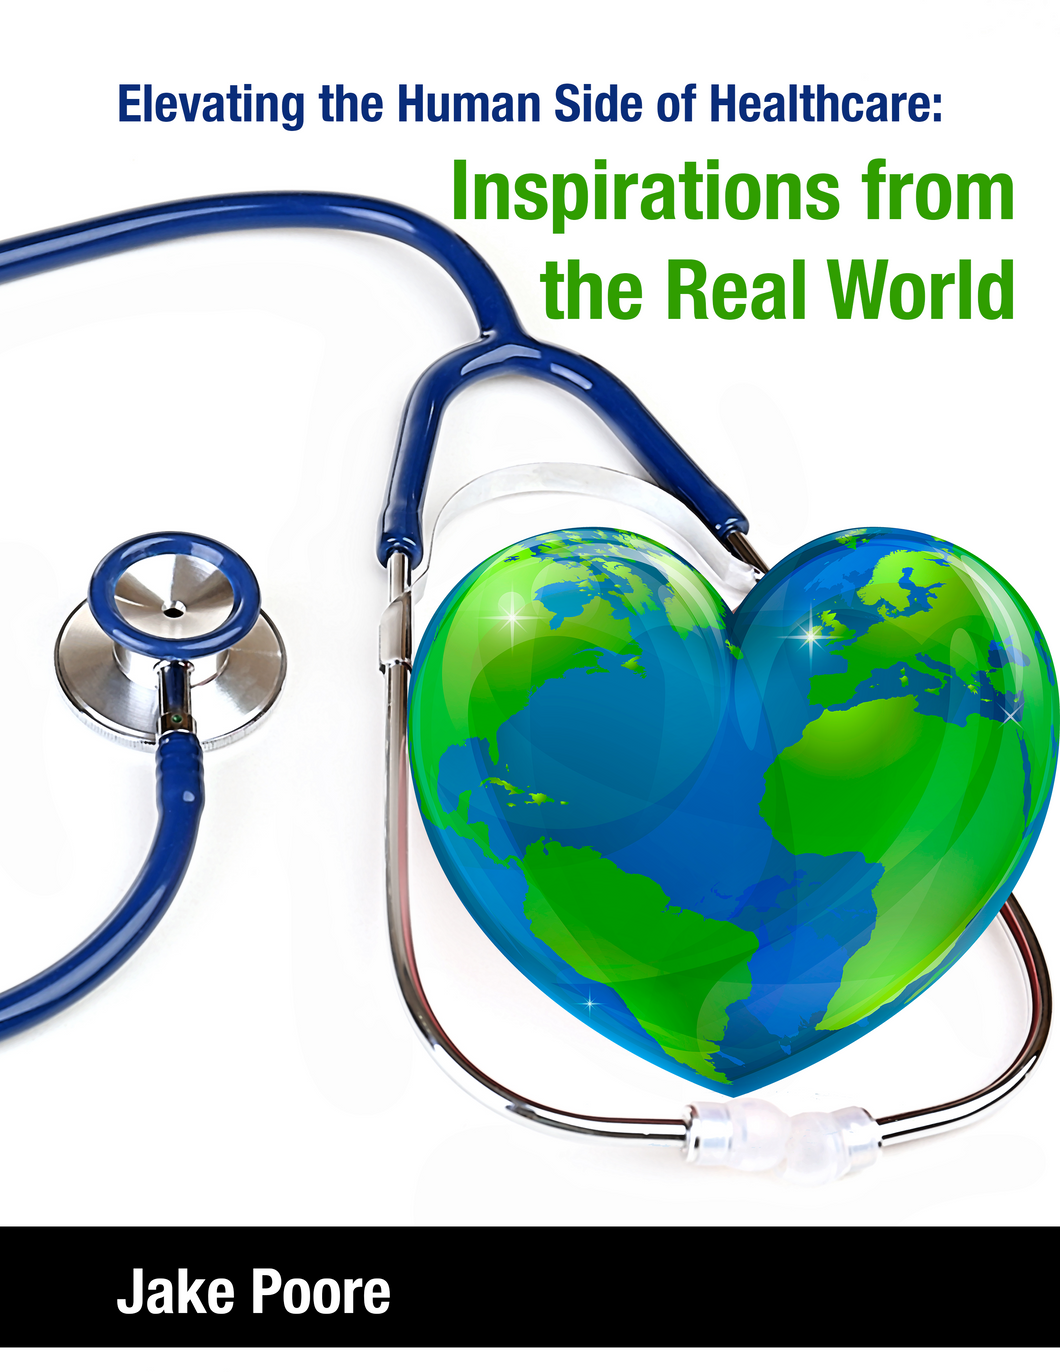 Elevating the Human Side of Healthcare: Inspirations from the Real World